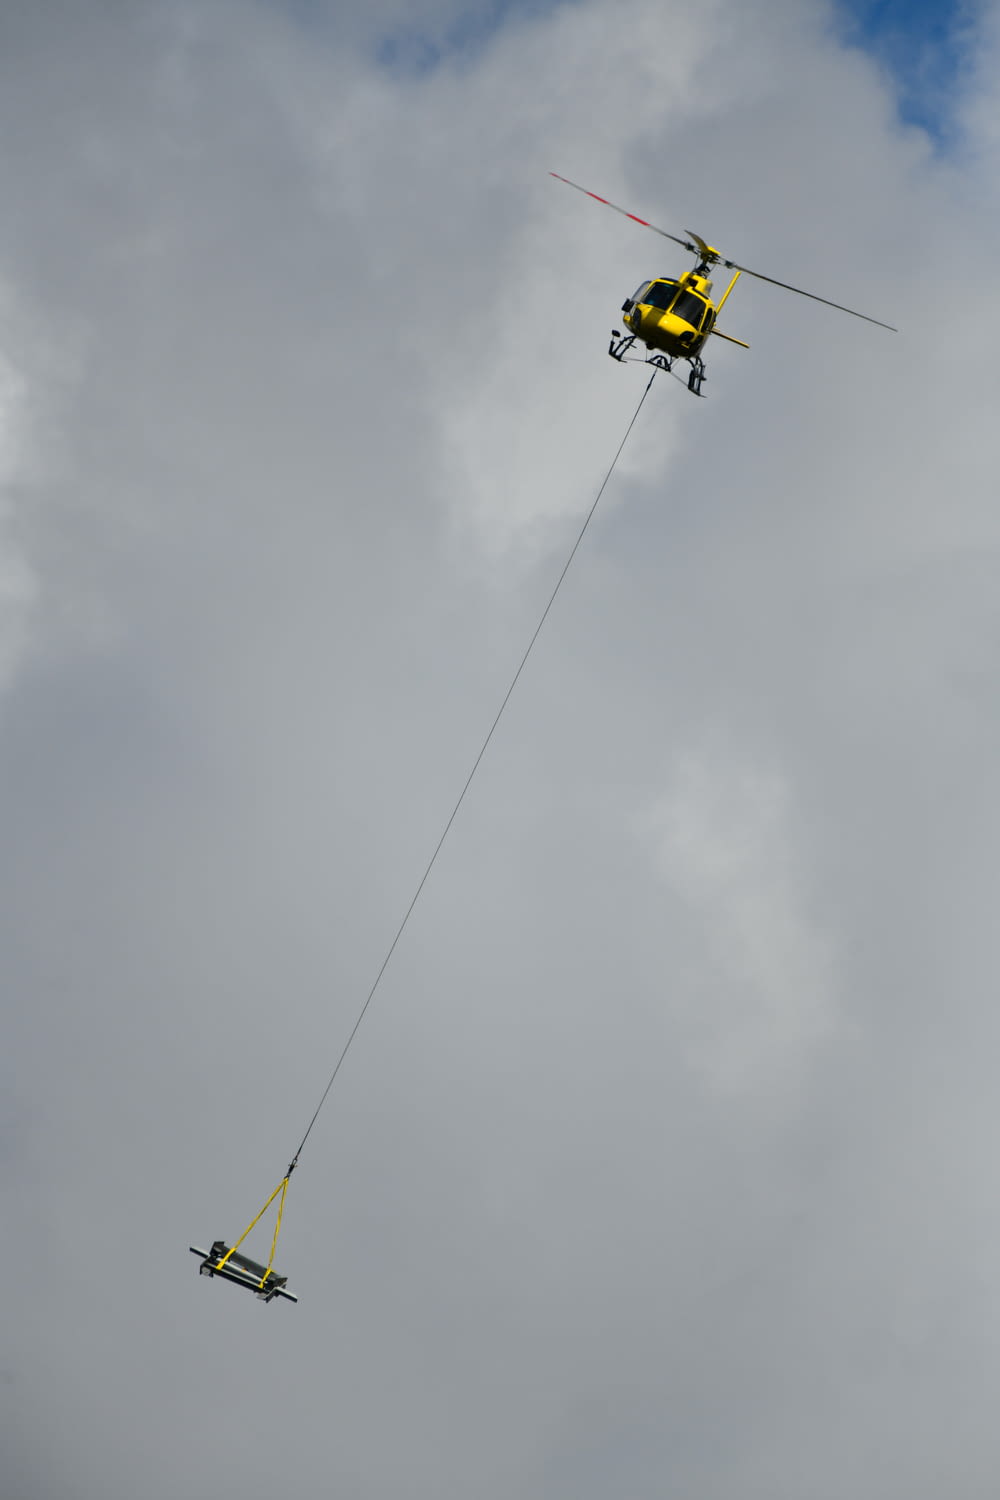 yellow and black helicopter flying under white clouds during daytime